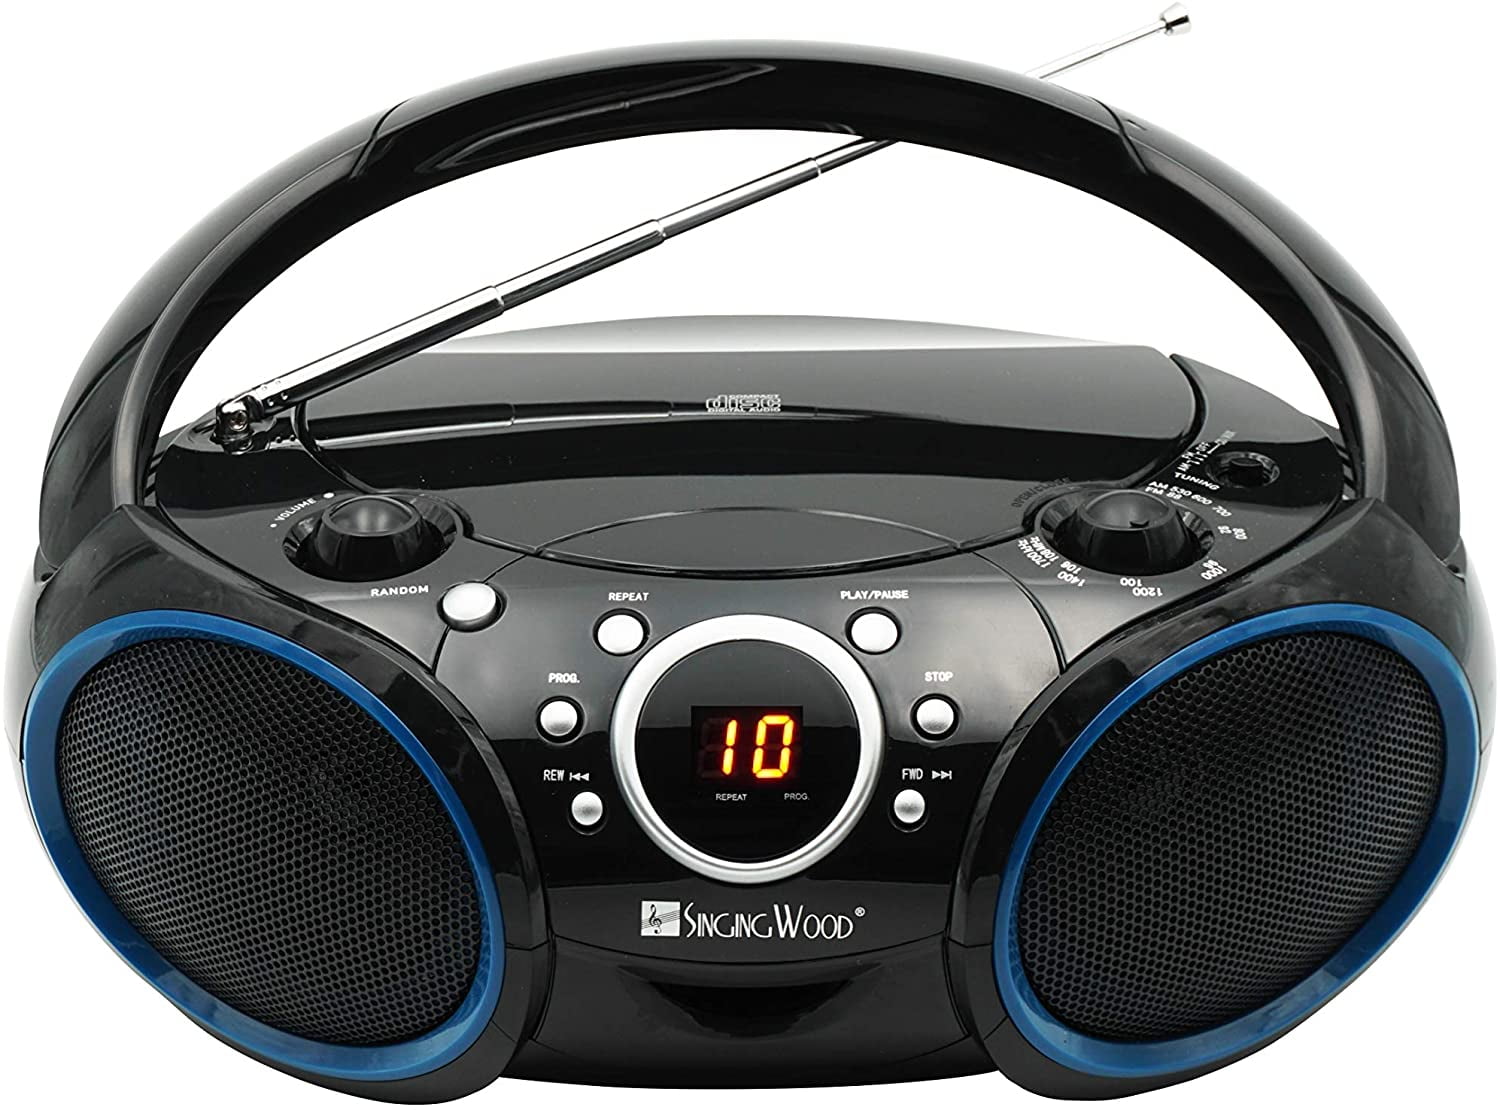  JENSEN CD-590-BL CD-590 1-Watt Portable Stereo CD and Cassette  Player/Recorder with AM/FM Radio and Bluetooth (Blue) : Electronics